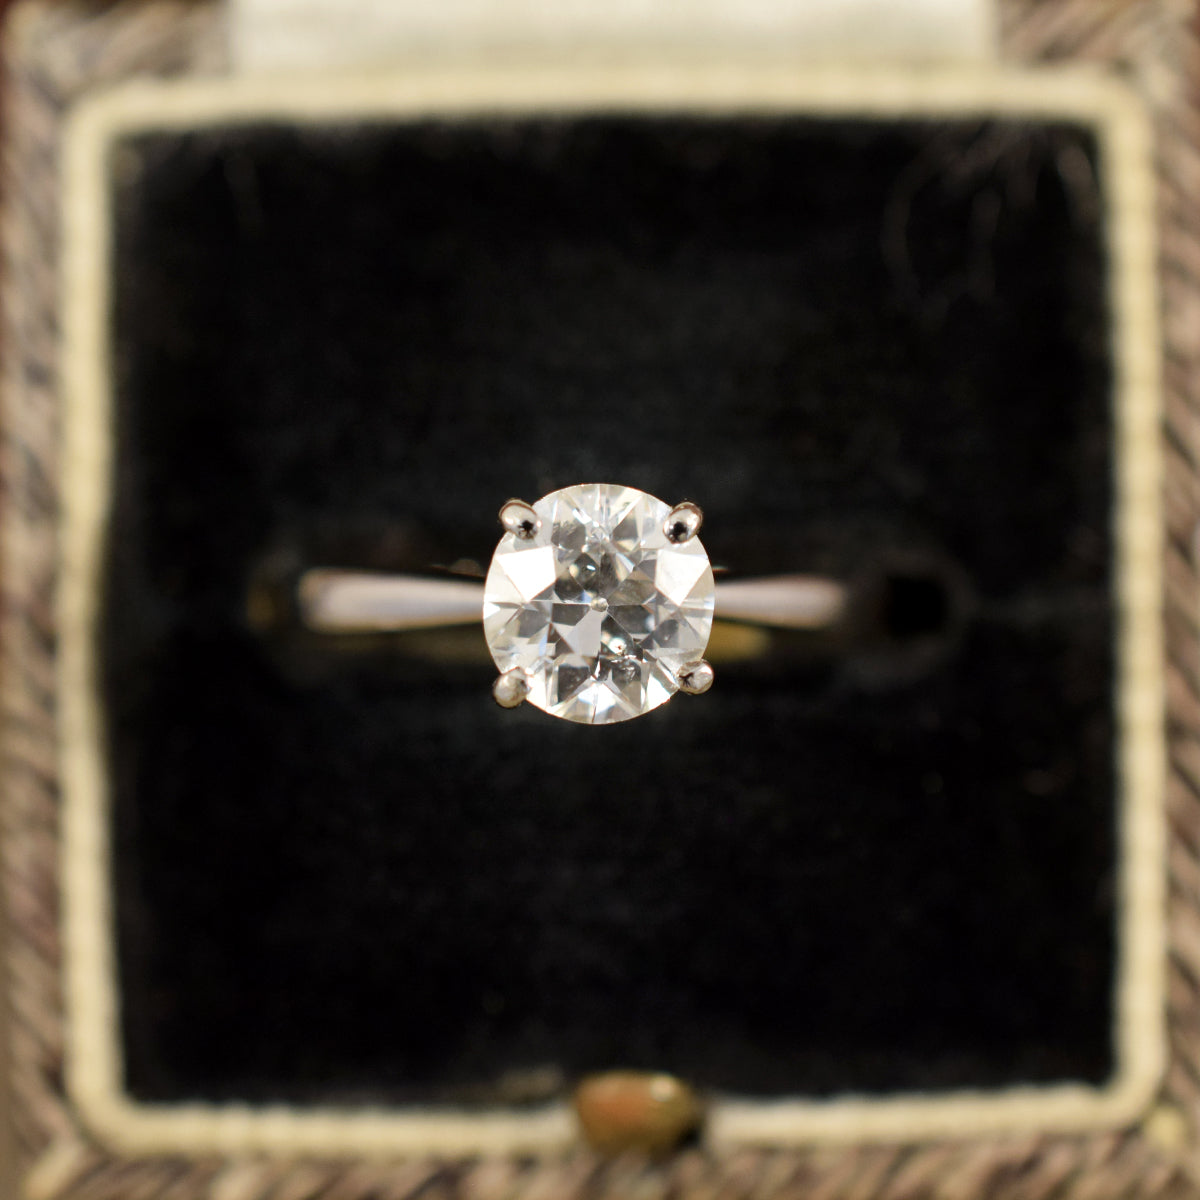 1.07ct Old European Cut Diamond Solitaire Ring in 18ct White Gold